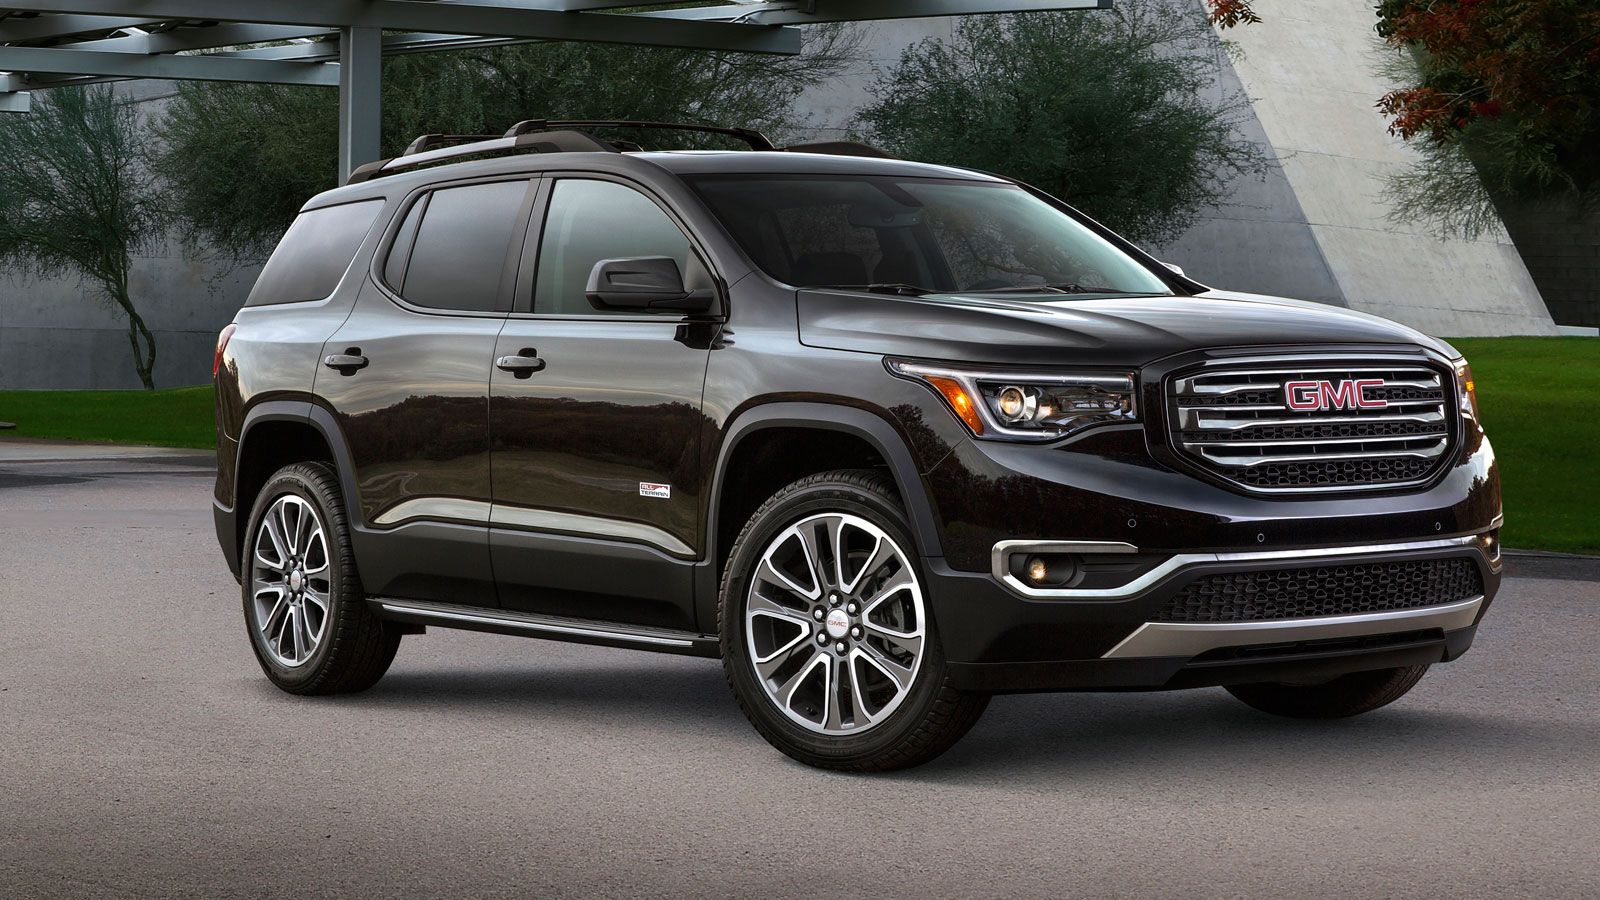 2018 GMC Acadia Prices, Reviews, and Photos - MotorTrend